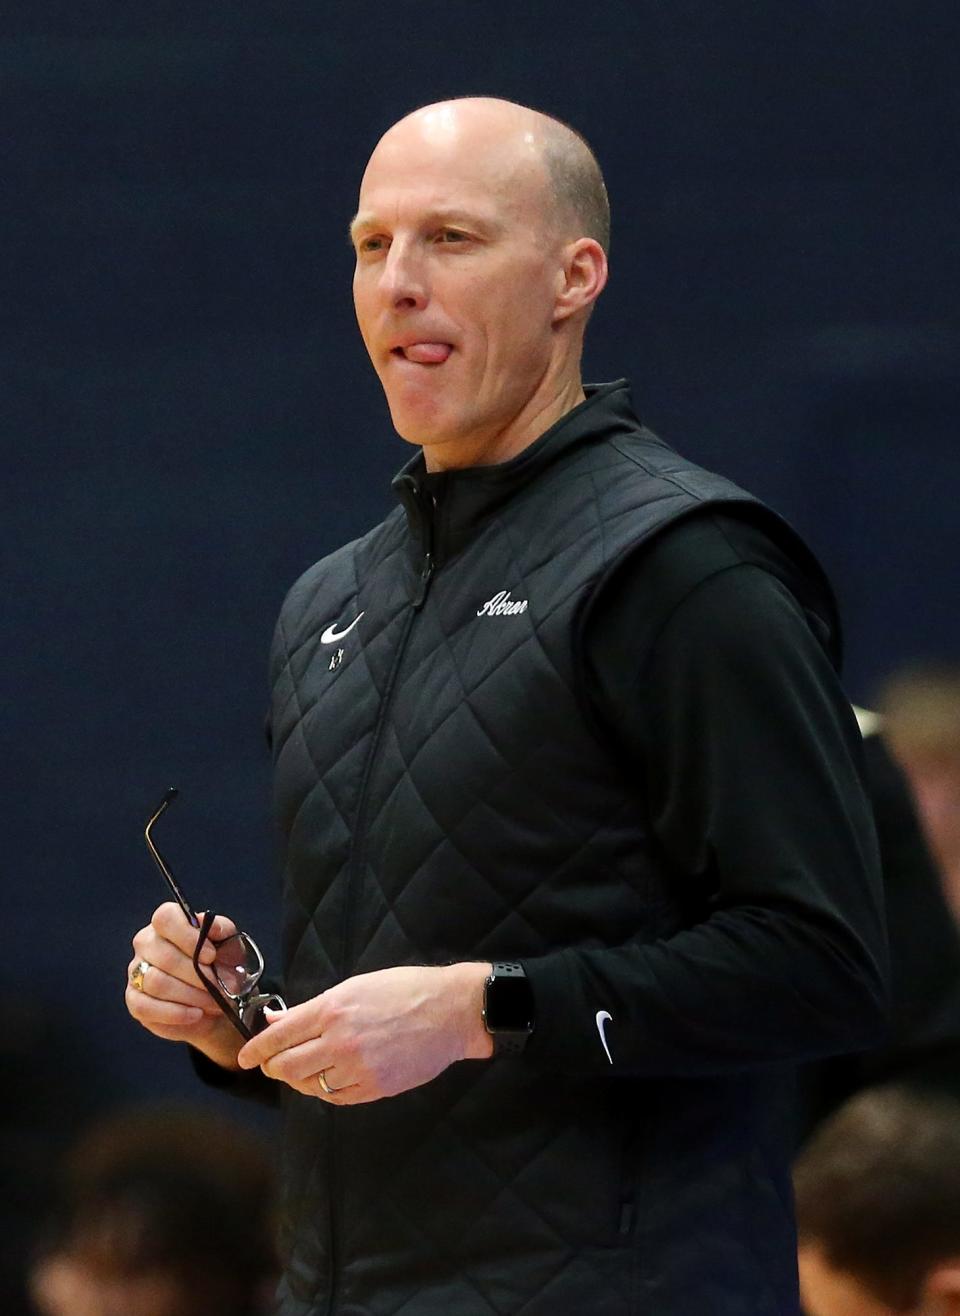 University of Akron men's basketball coach John Groce said he expects Bryan Trimble Jr.'s offense and 3-point shooting to be made up "by committee."